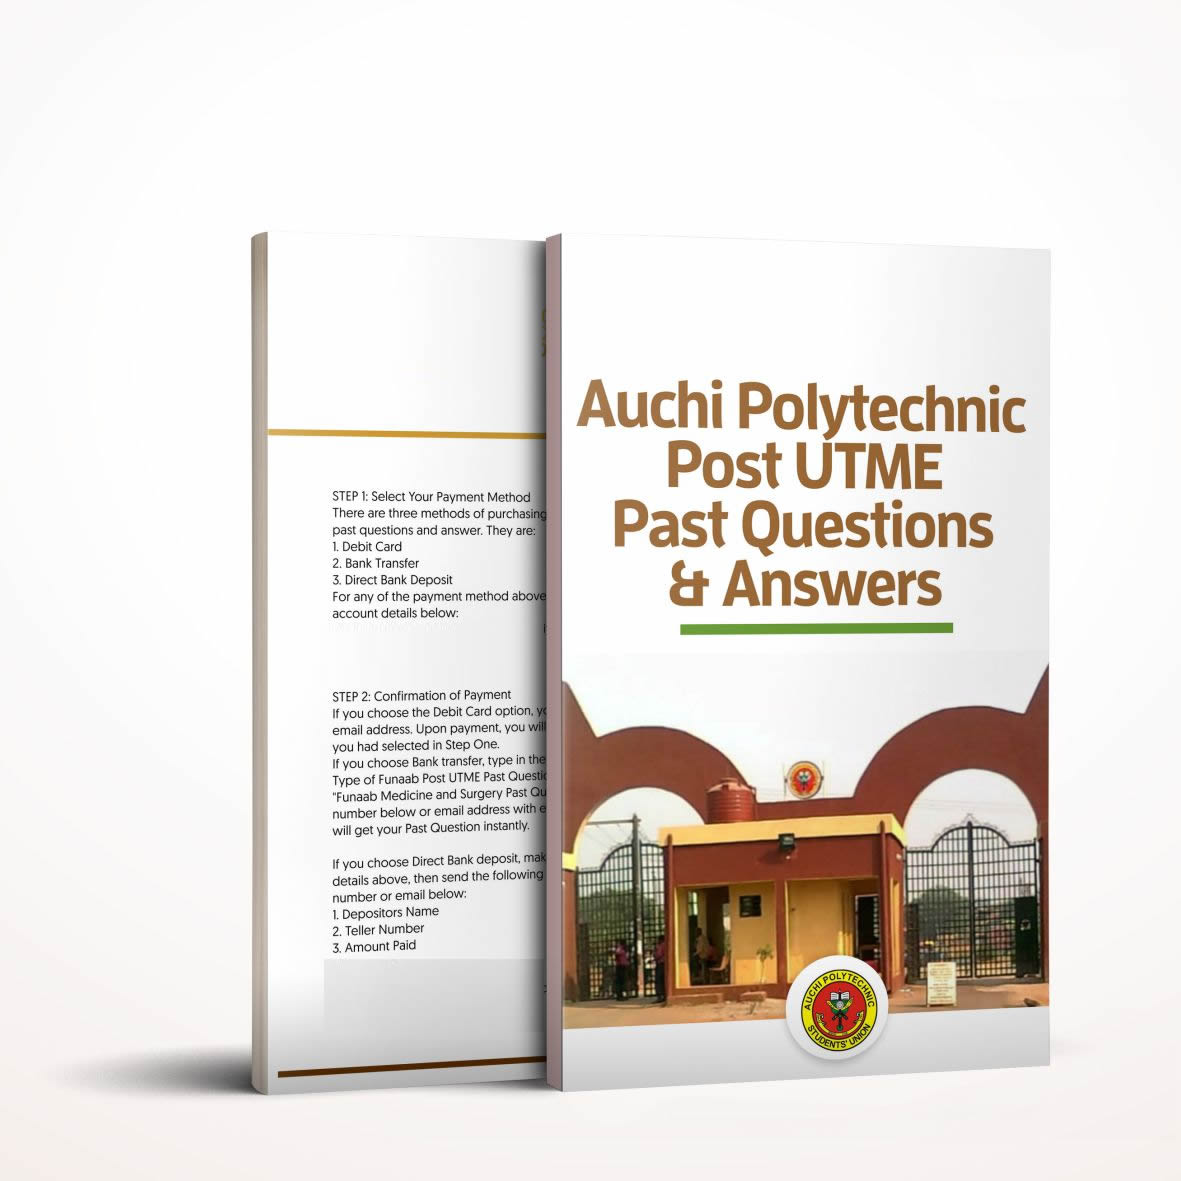 Auchi Poly post utme past questions and answers